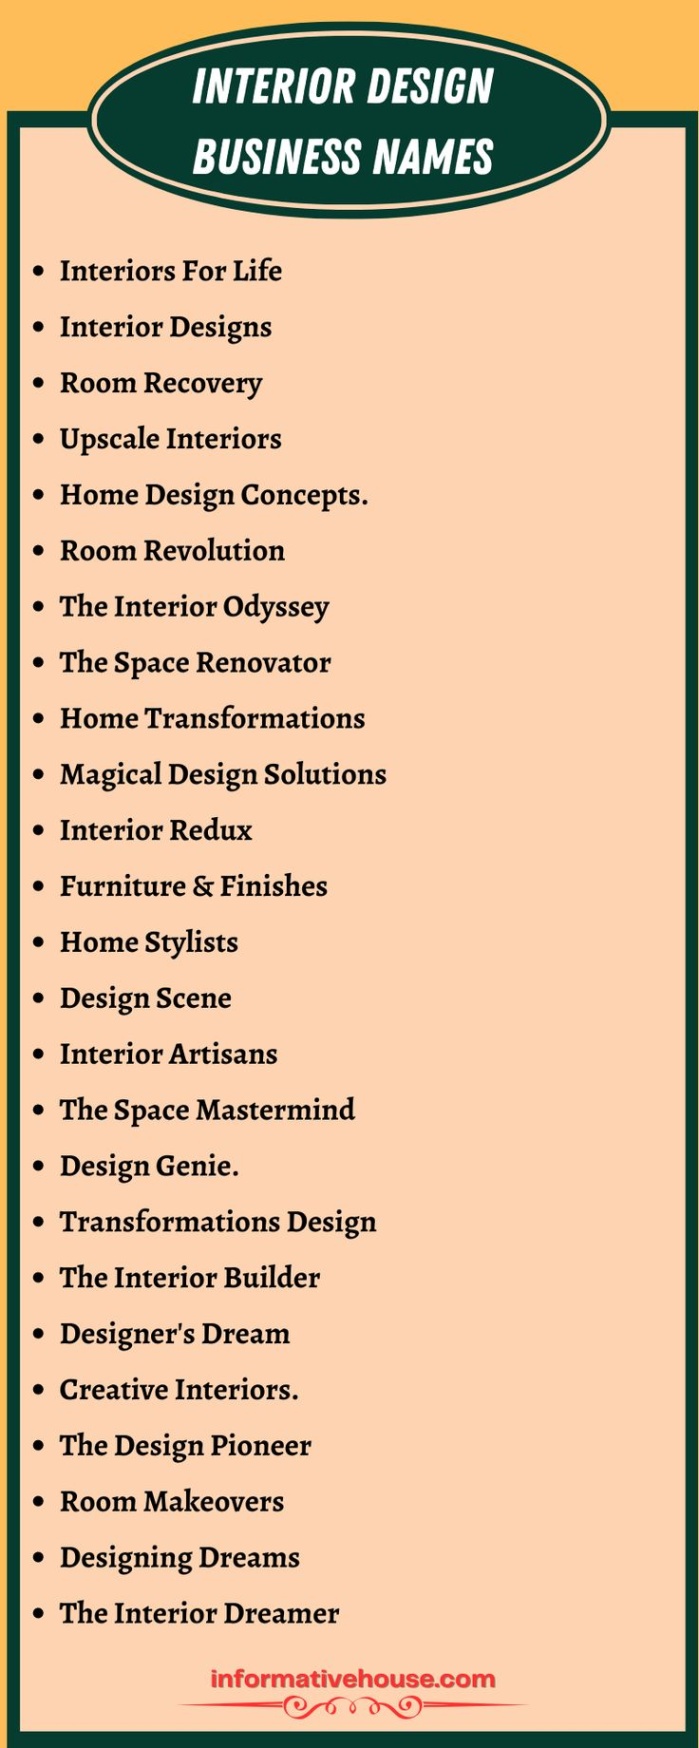 Get Inspired With These Creative Interior Design Company Names!